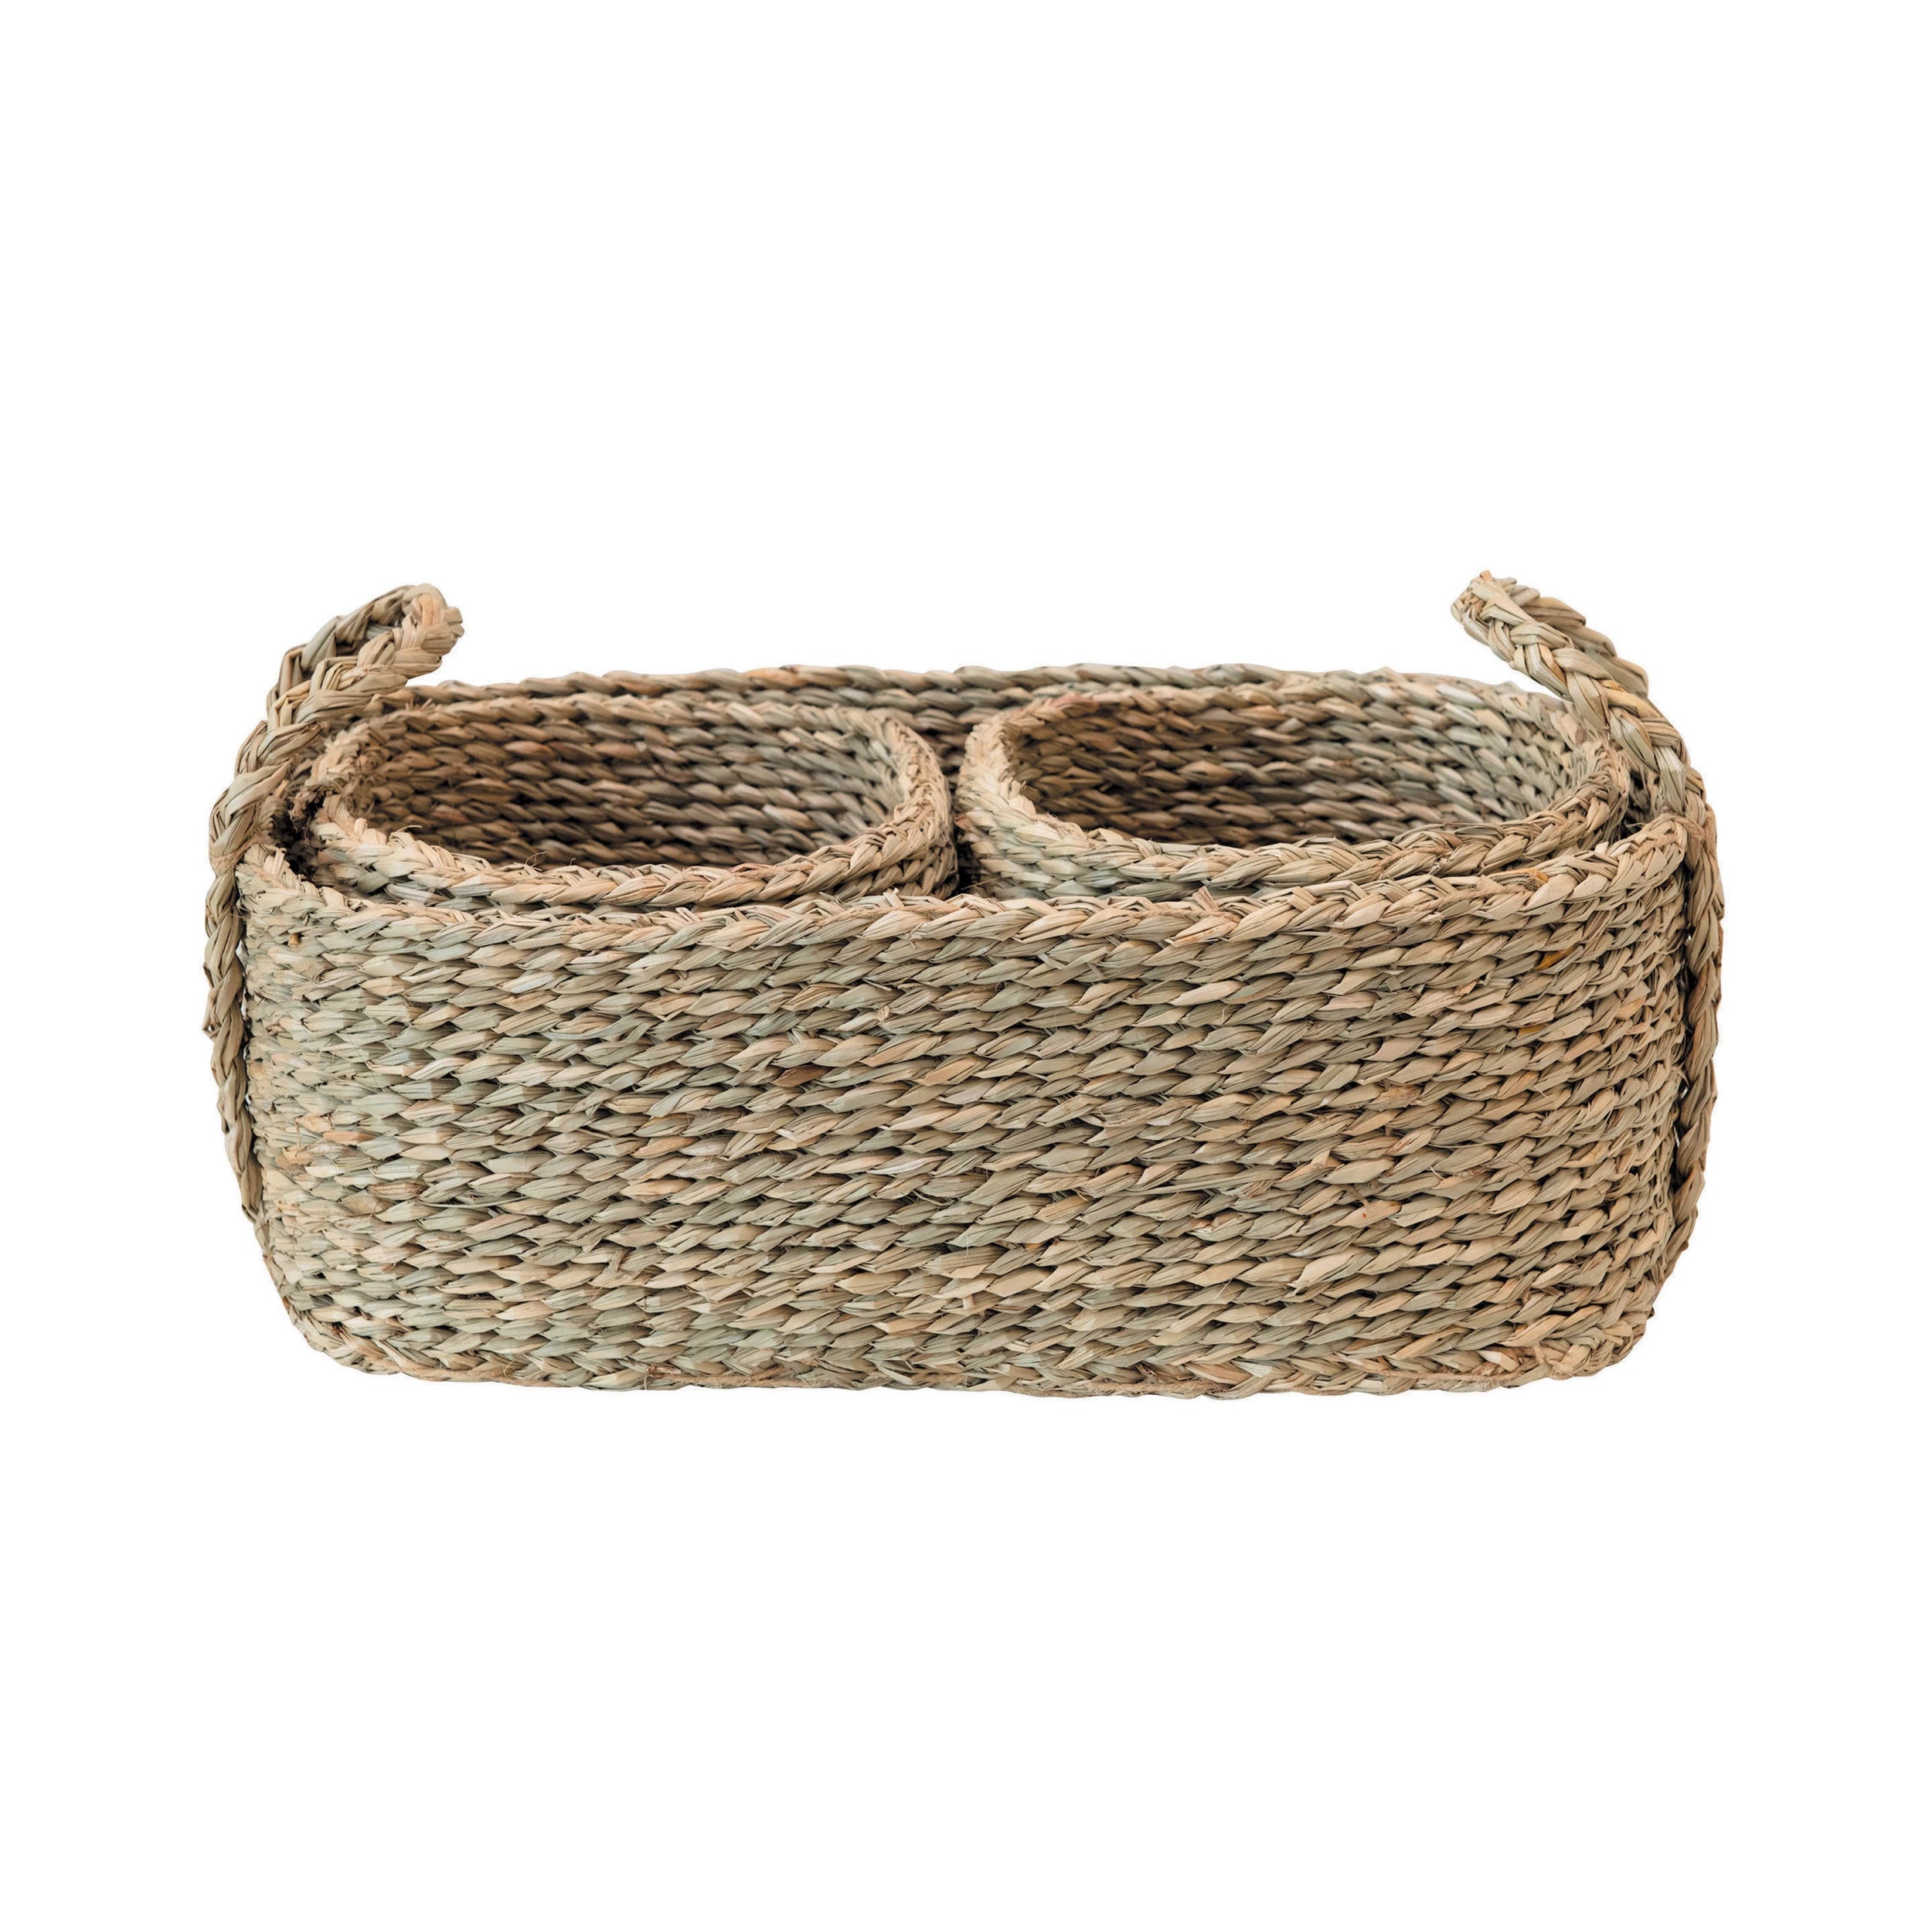 Nested Woven Baskets (Set of 3)